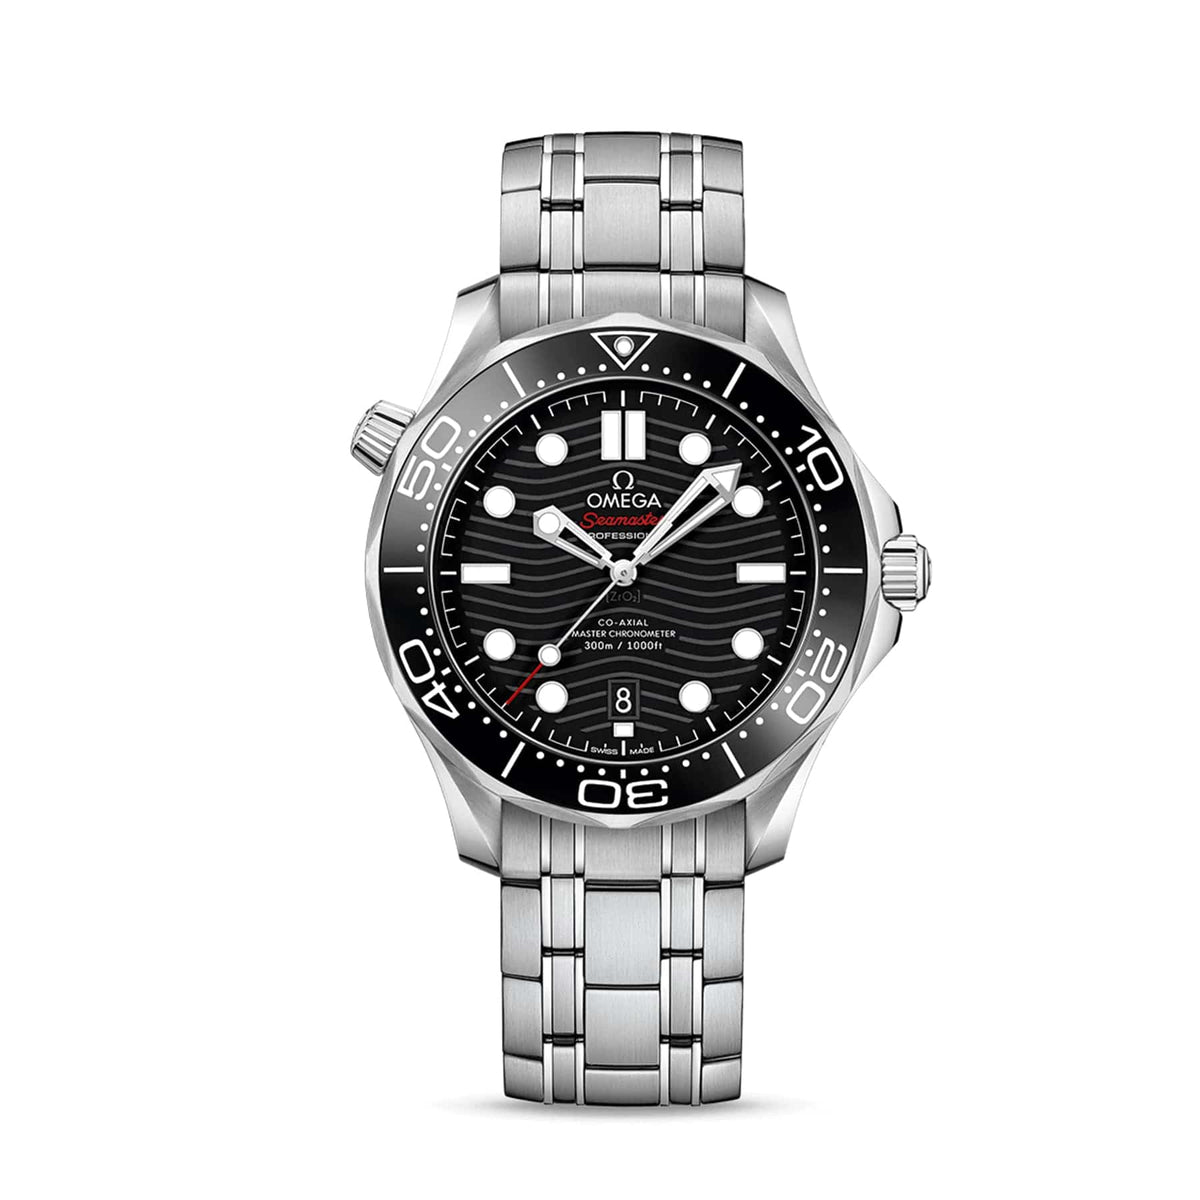 OMEGA Seamaster Diver 300M Co-Axial Master Chronometer 42mm 210.30.42.21.01.001